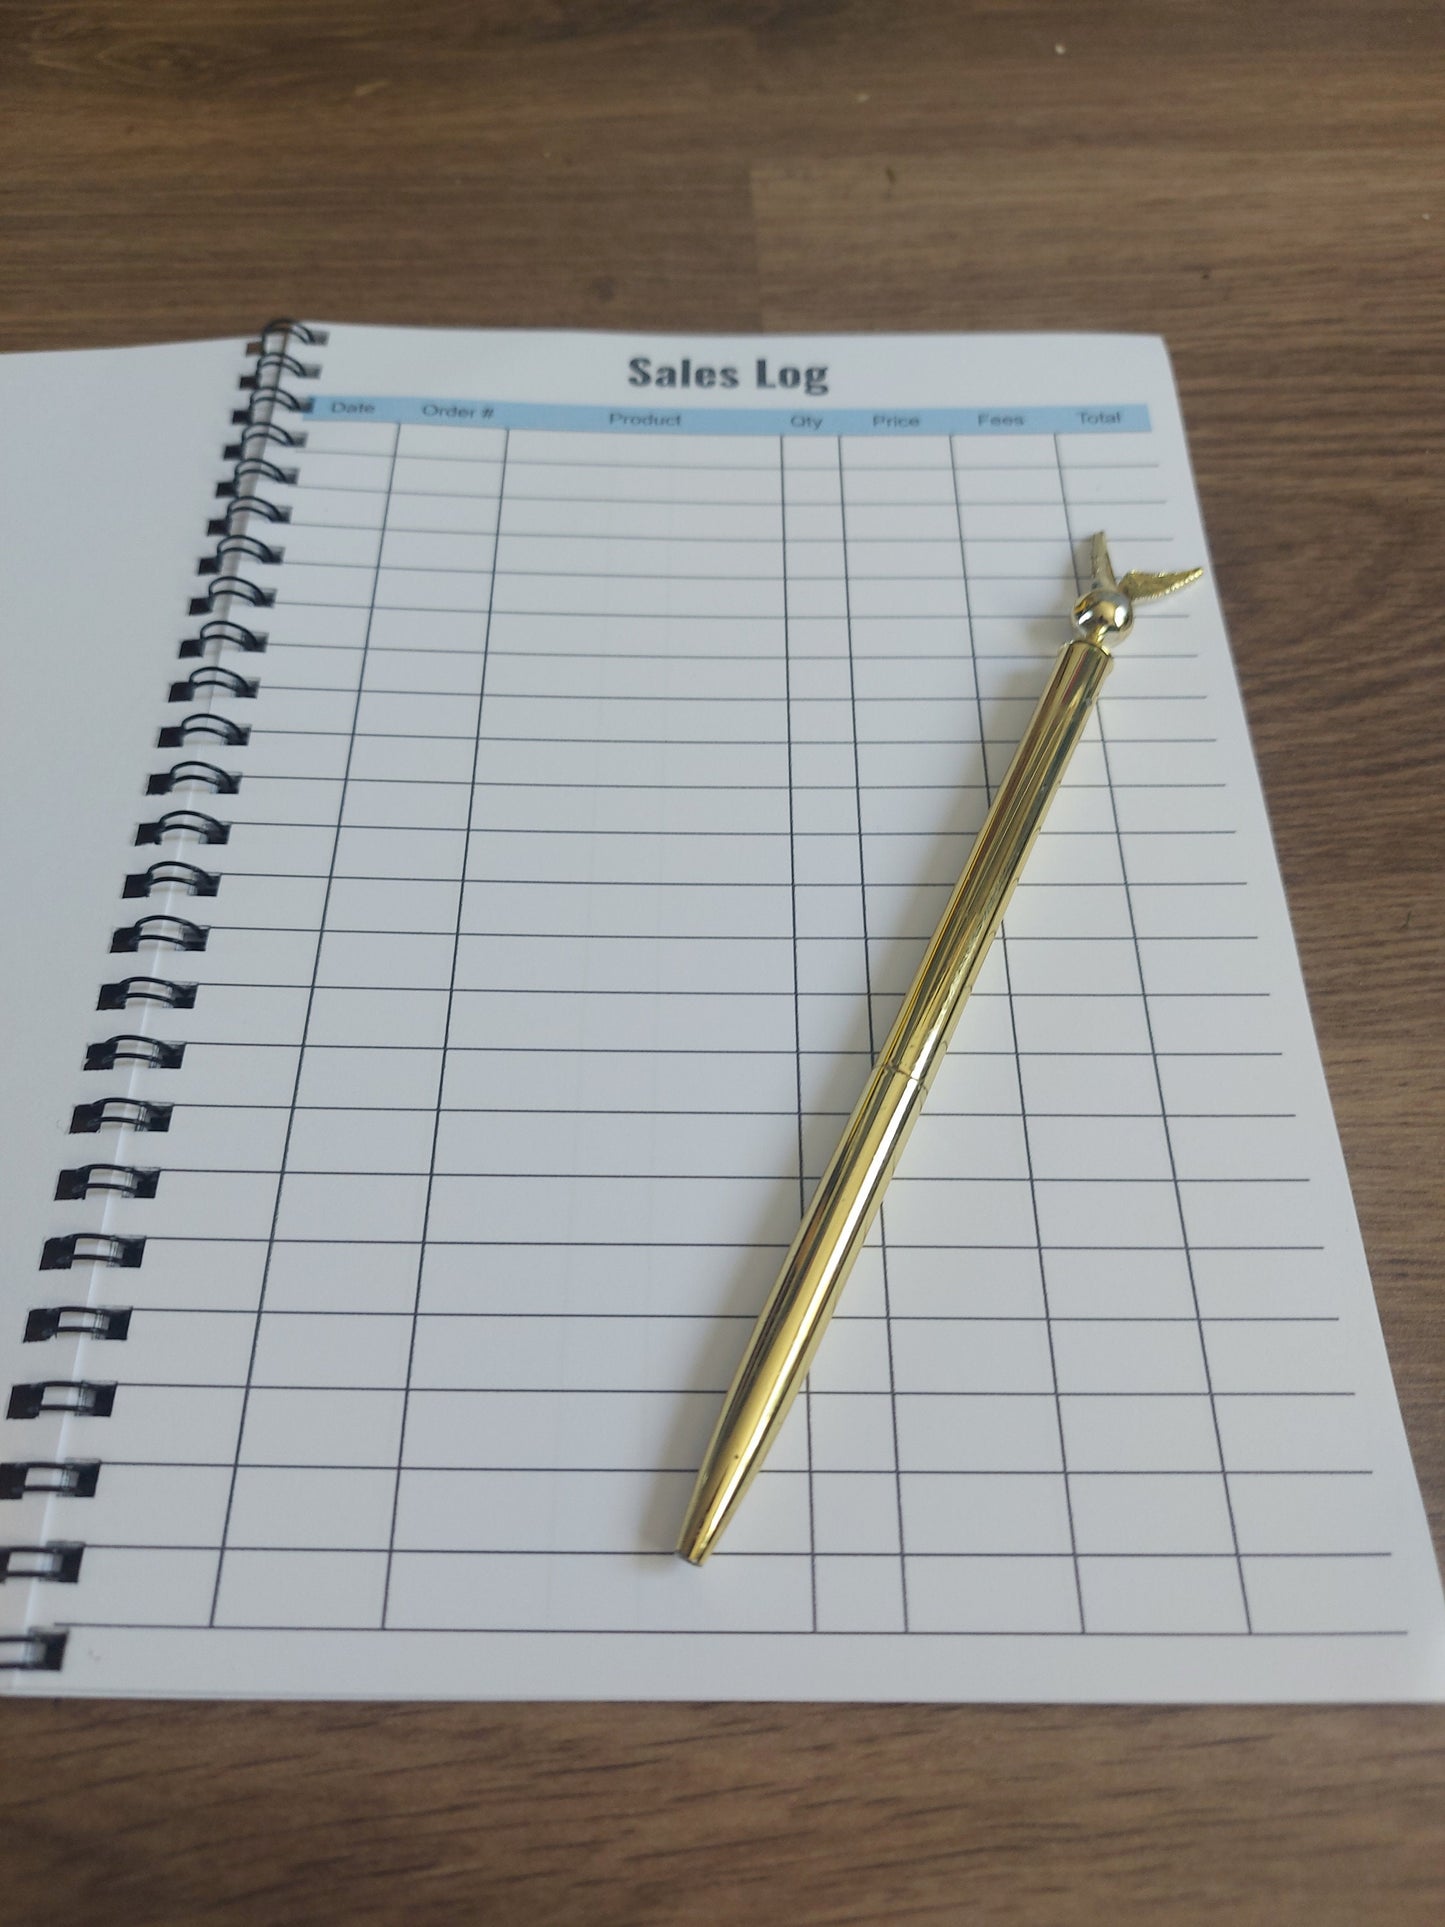 Business logo sales tracker, account book, craft fair tracker, sales record book, record book, accounts